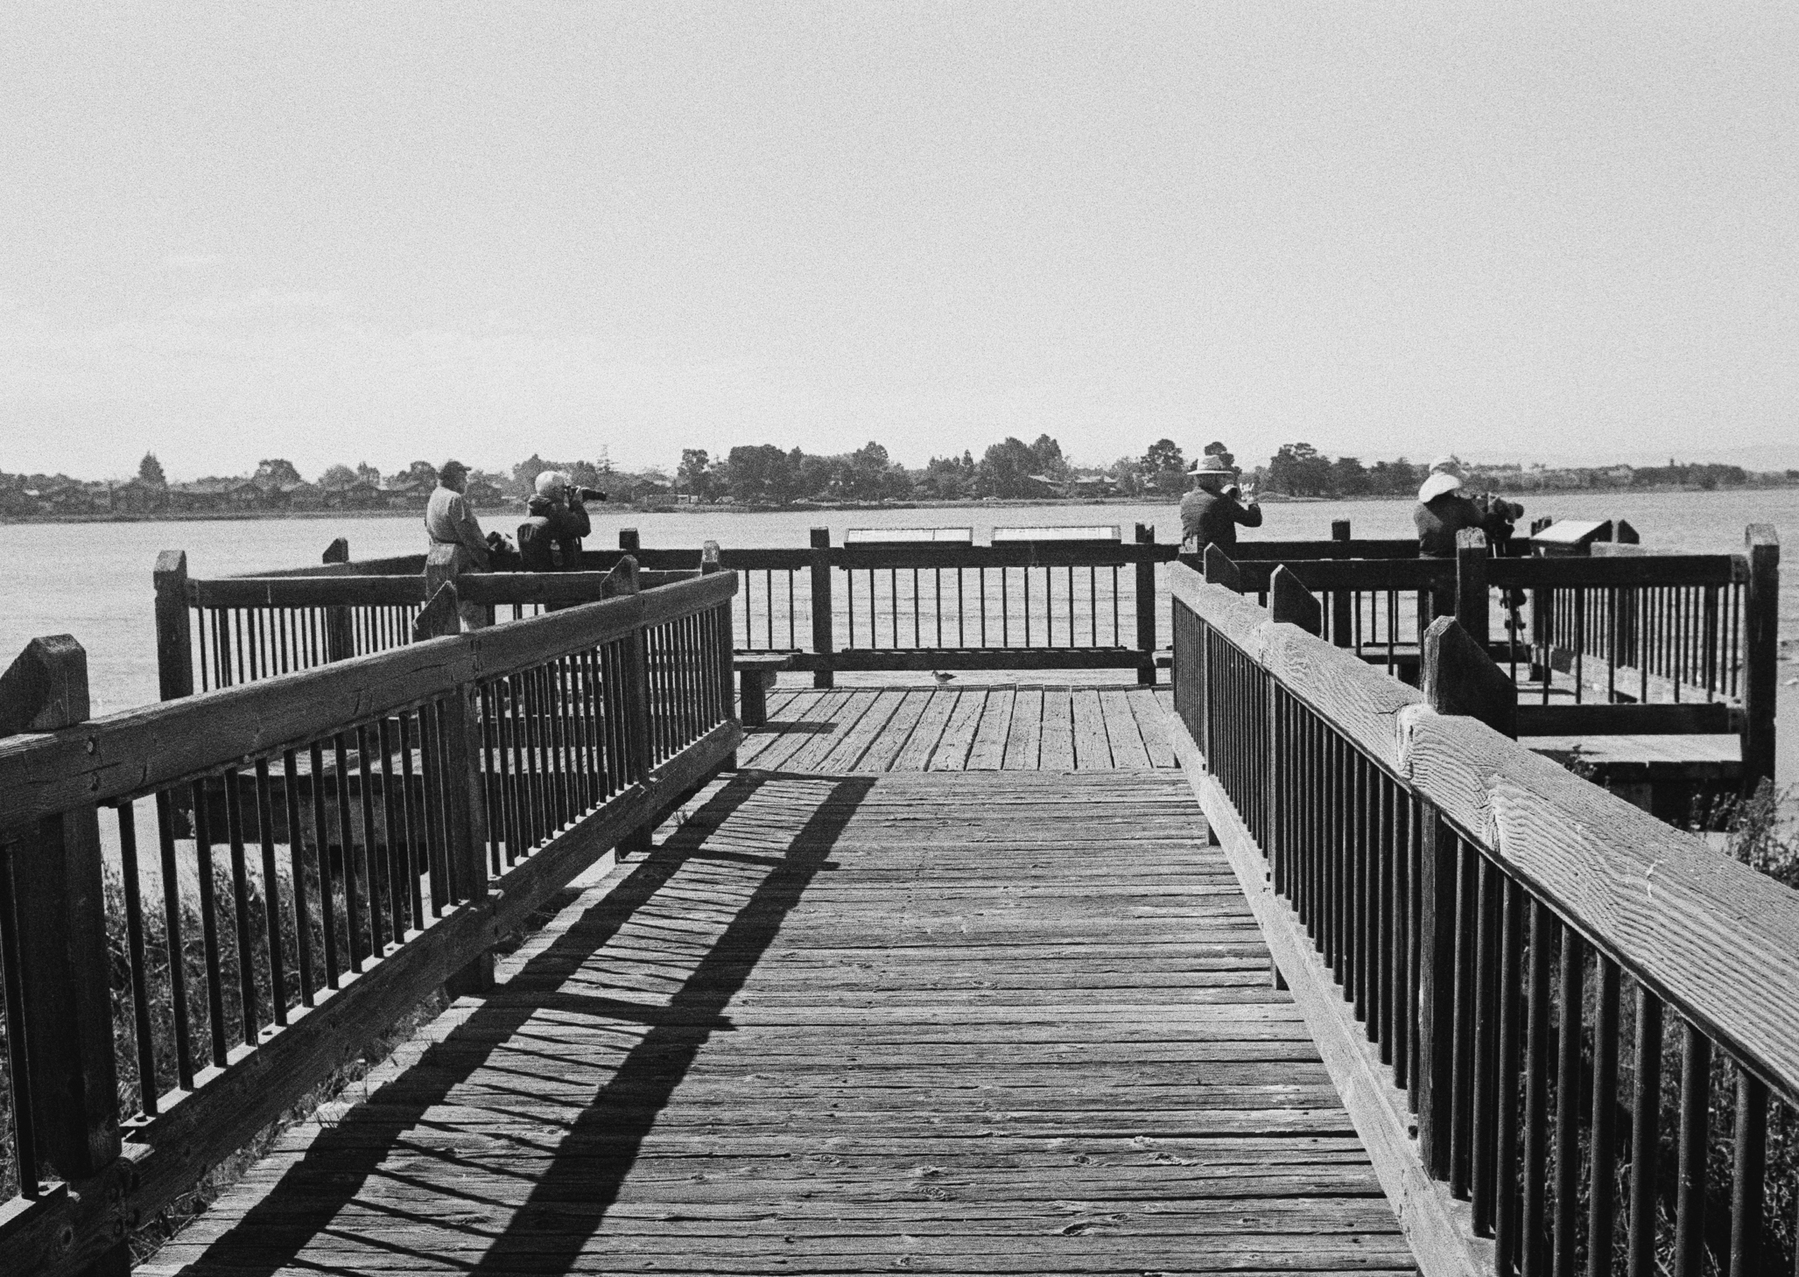 a scan of a black and white photo showing people standing on a wooden boardwalk looking at birds